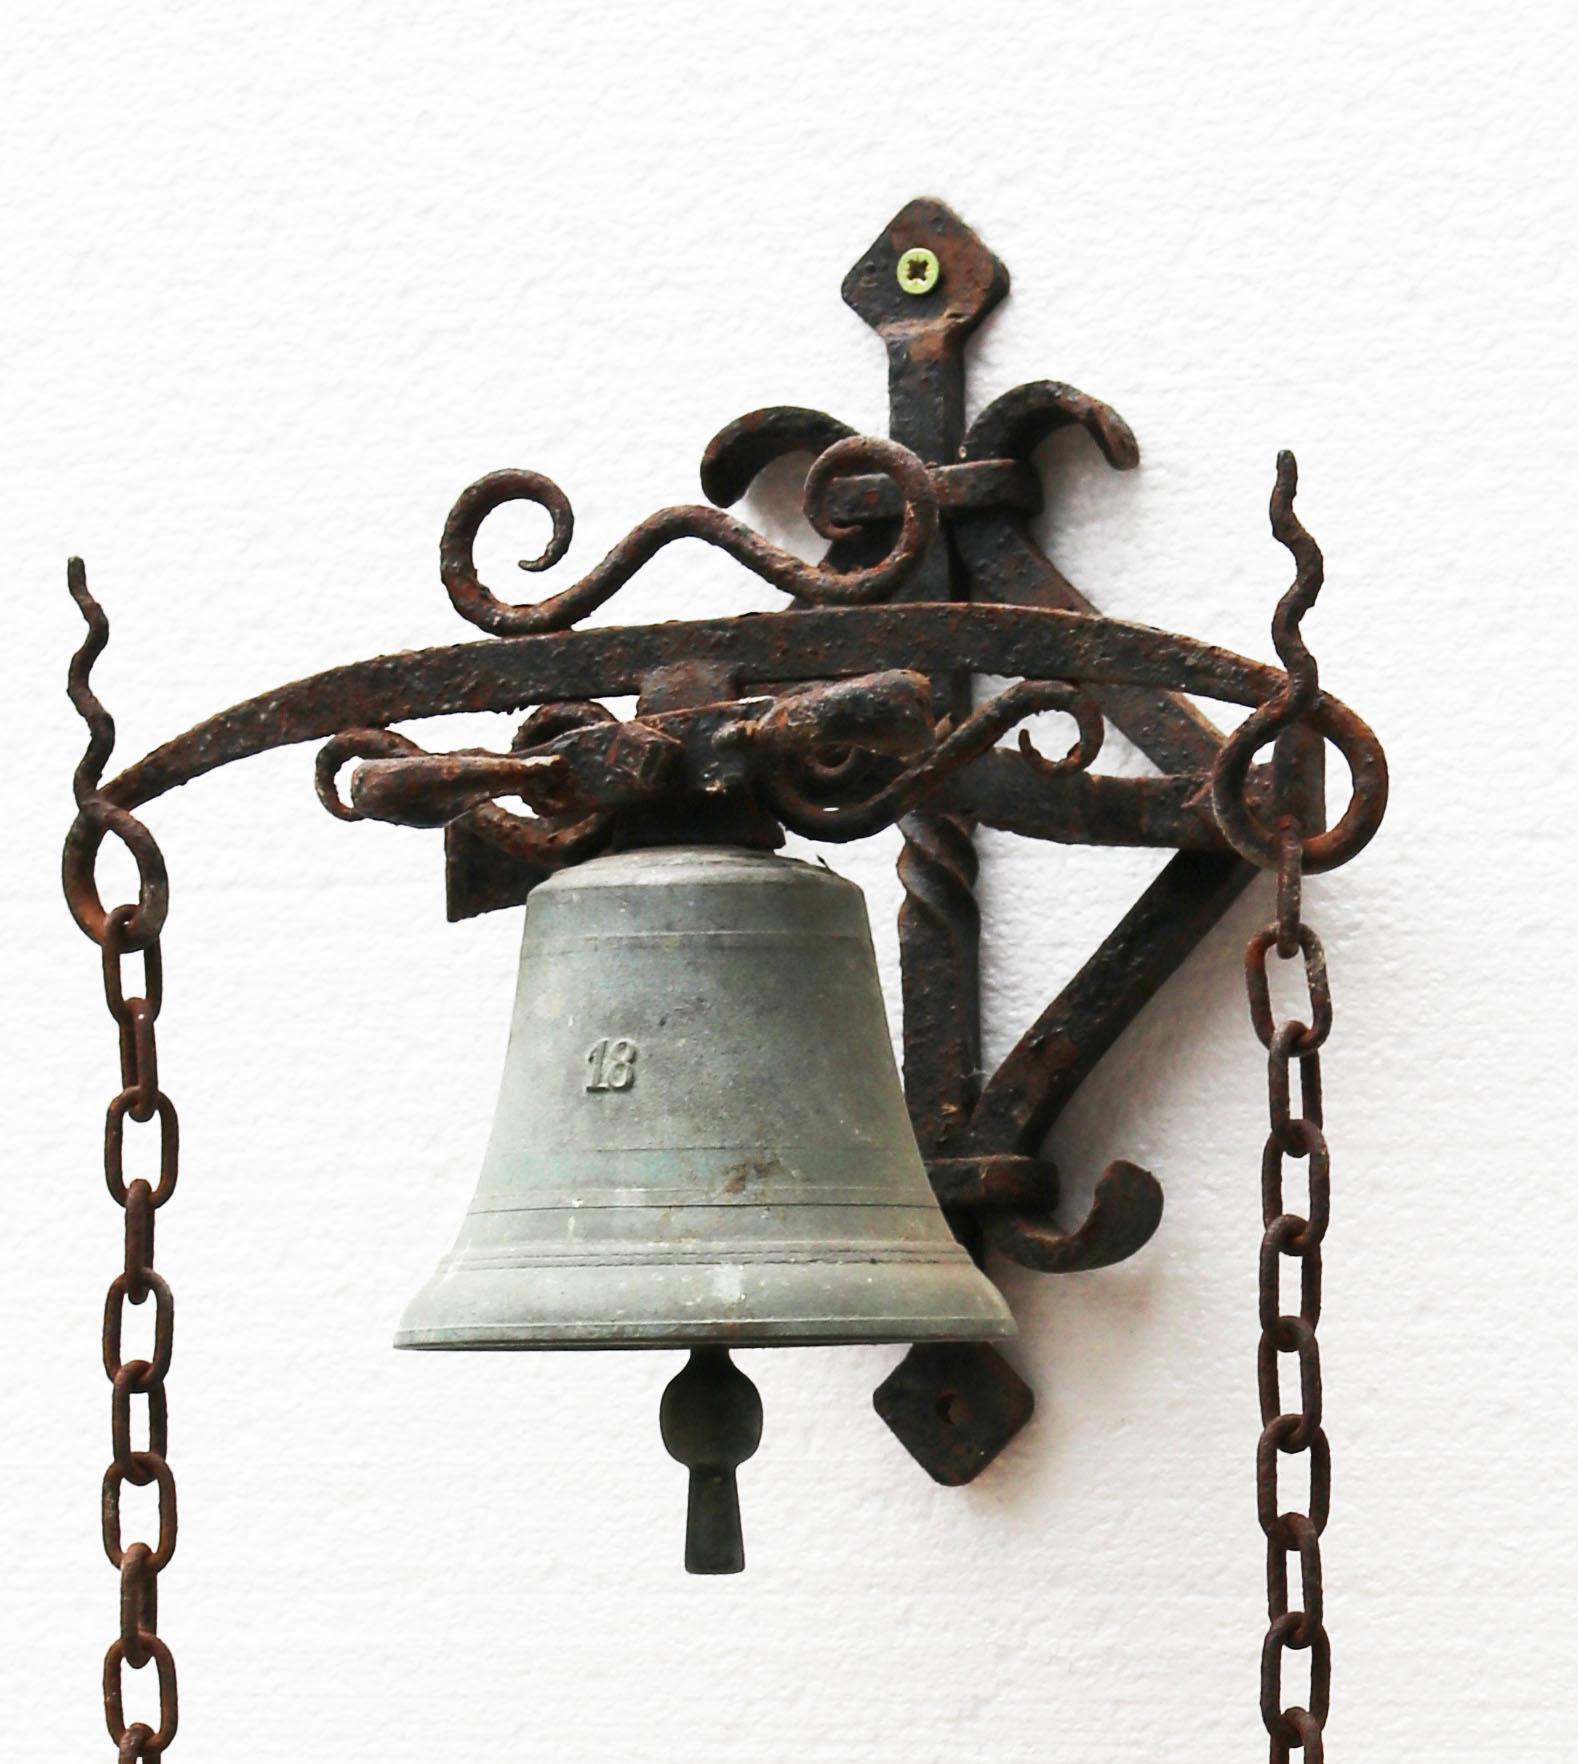 About

A pretty blacksmith made antique door bell with pull chains.

Condition report

Full working condition. Surface rust and old paint finish to the bracket. 

Style

Victorian

Date of manufacture

circa 1890

Period

Late 19th